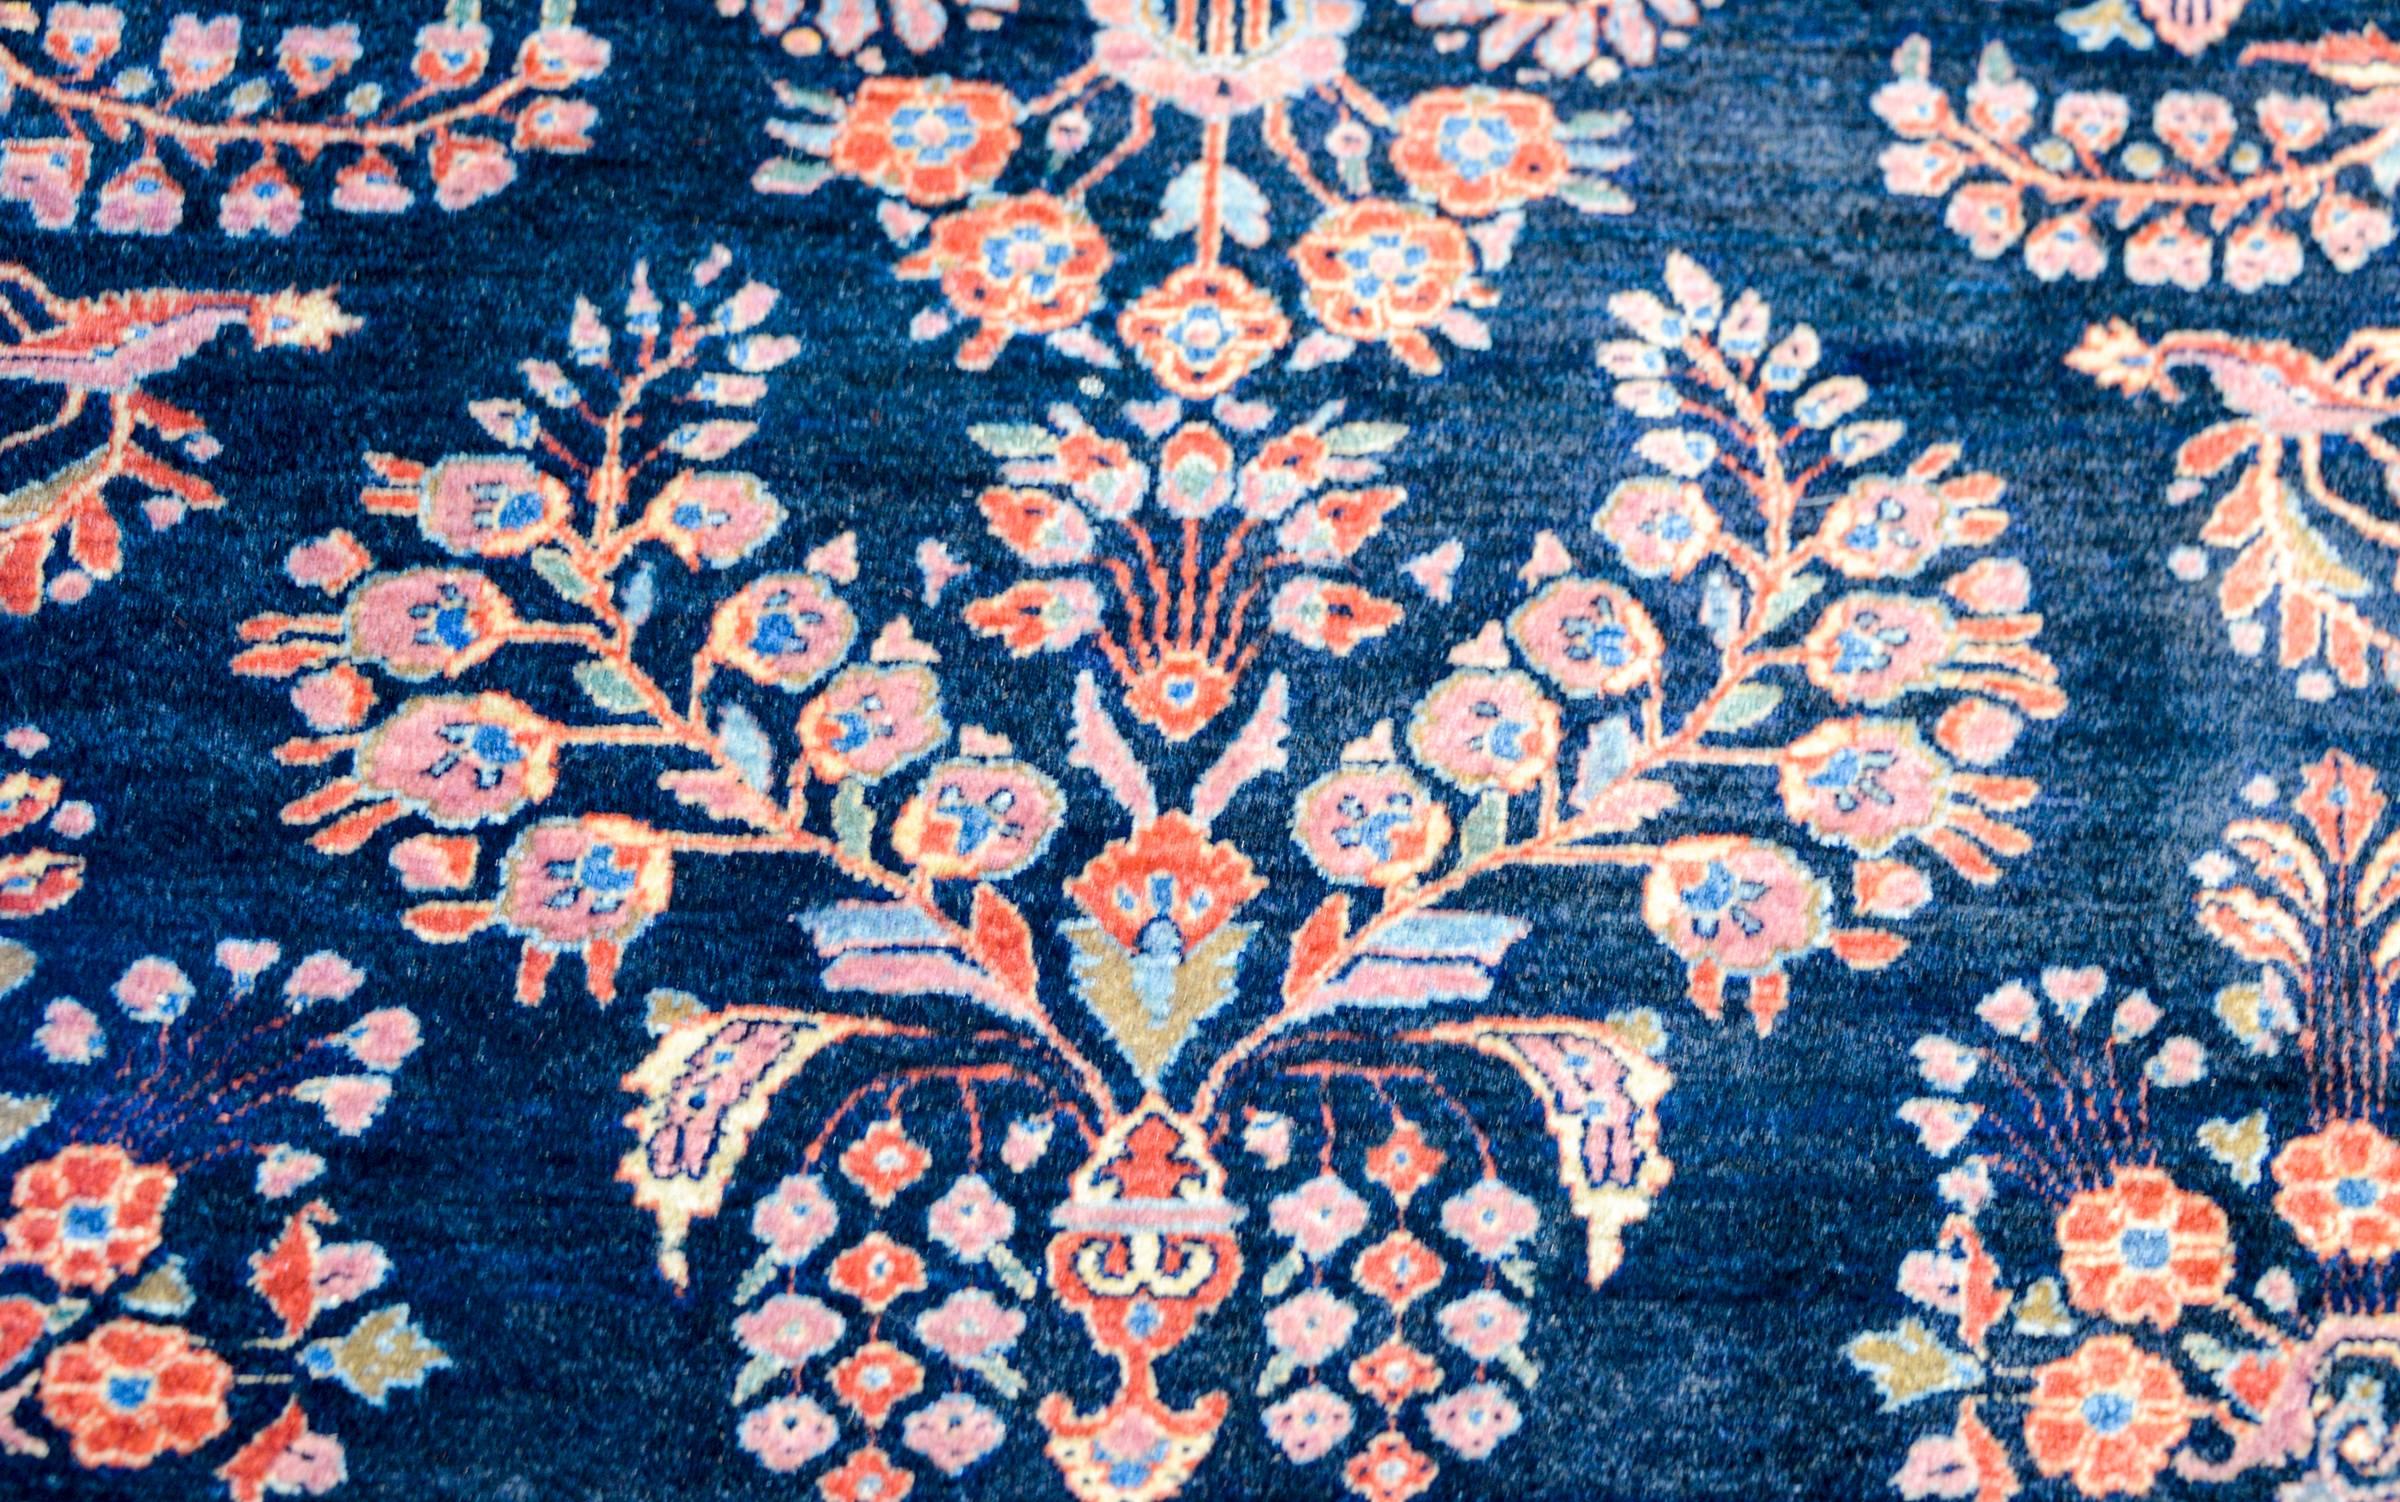 A wonderful and Classic early 20th century Persian Sarouk Mohajeran rug with a traditional mirrored floral pattern woven in crimson, pink, and light indigo, on a dark indigo background. The border is contrasting with a wide cranberry stripe with a